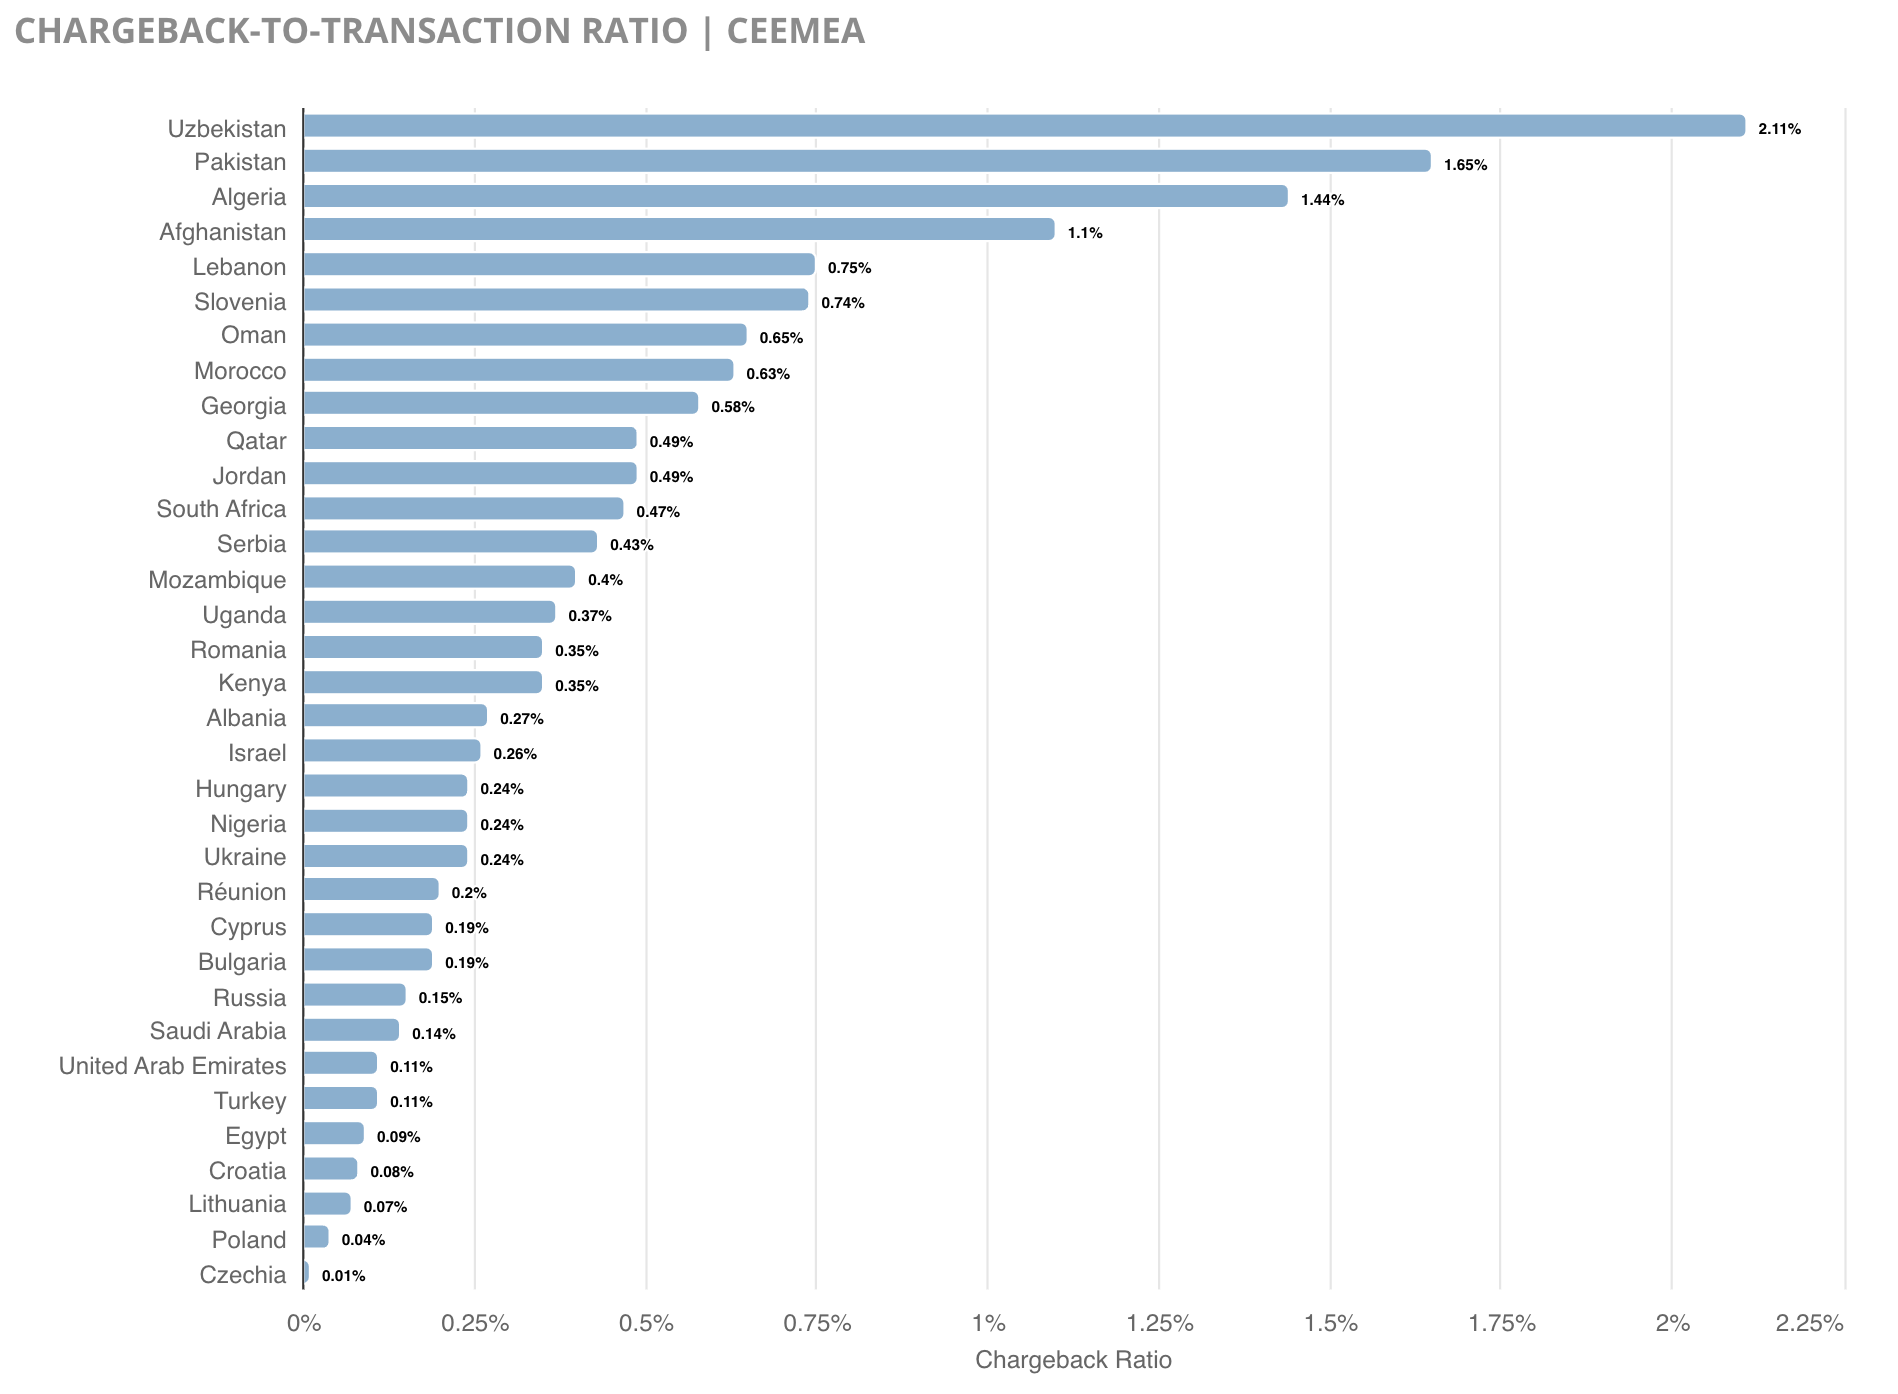 Chargeback-to-transaction ratio in CEEMEA